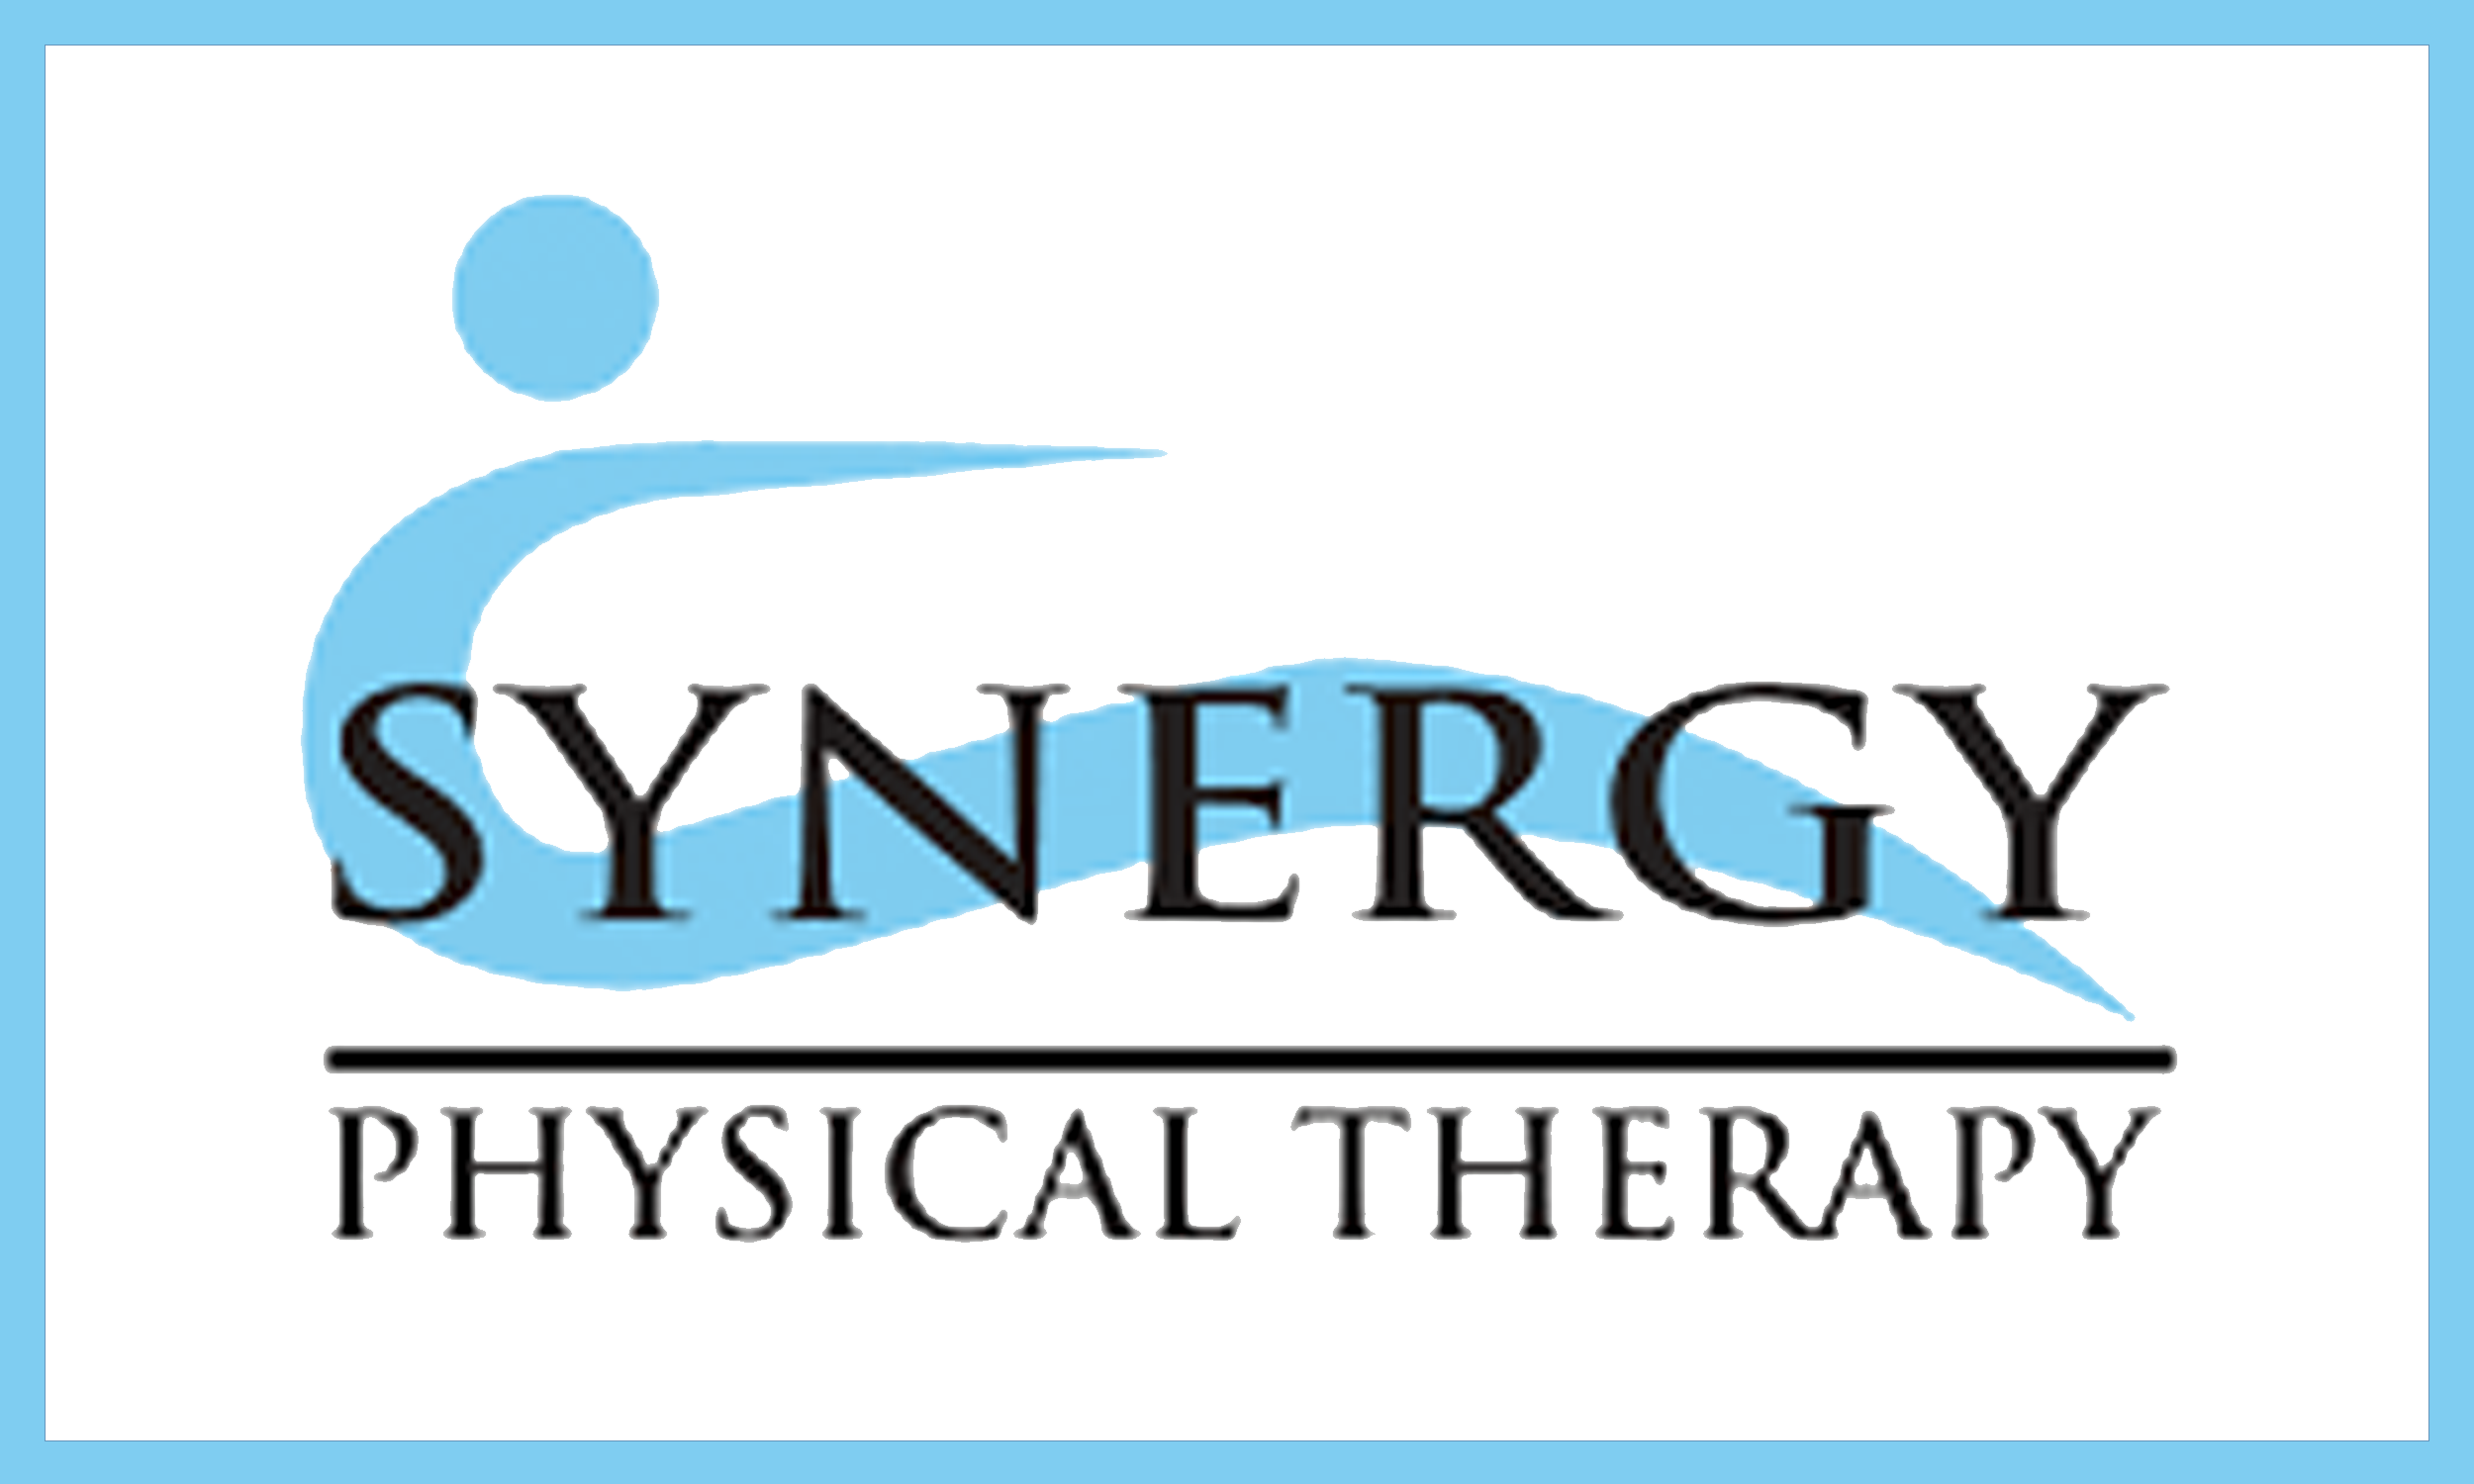 Prosynergy Physical Therapy